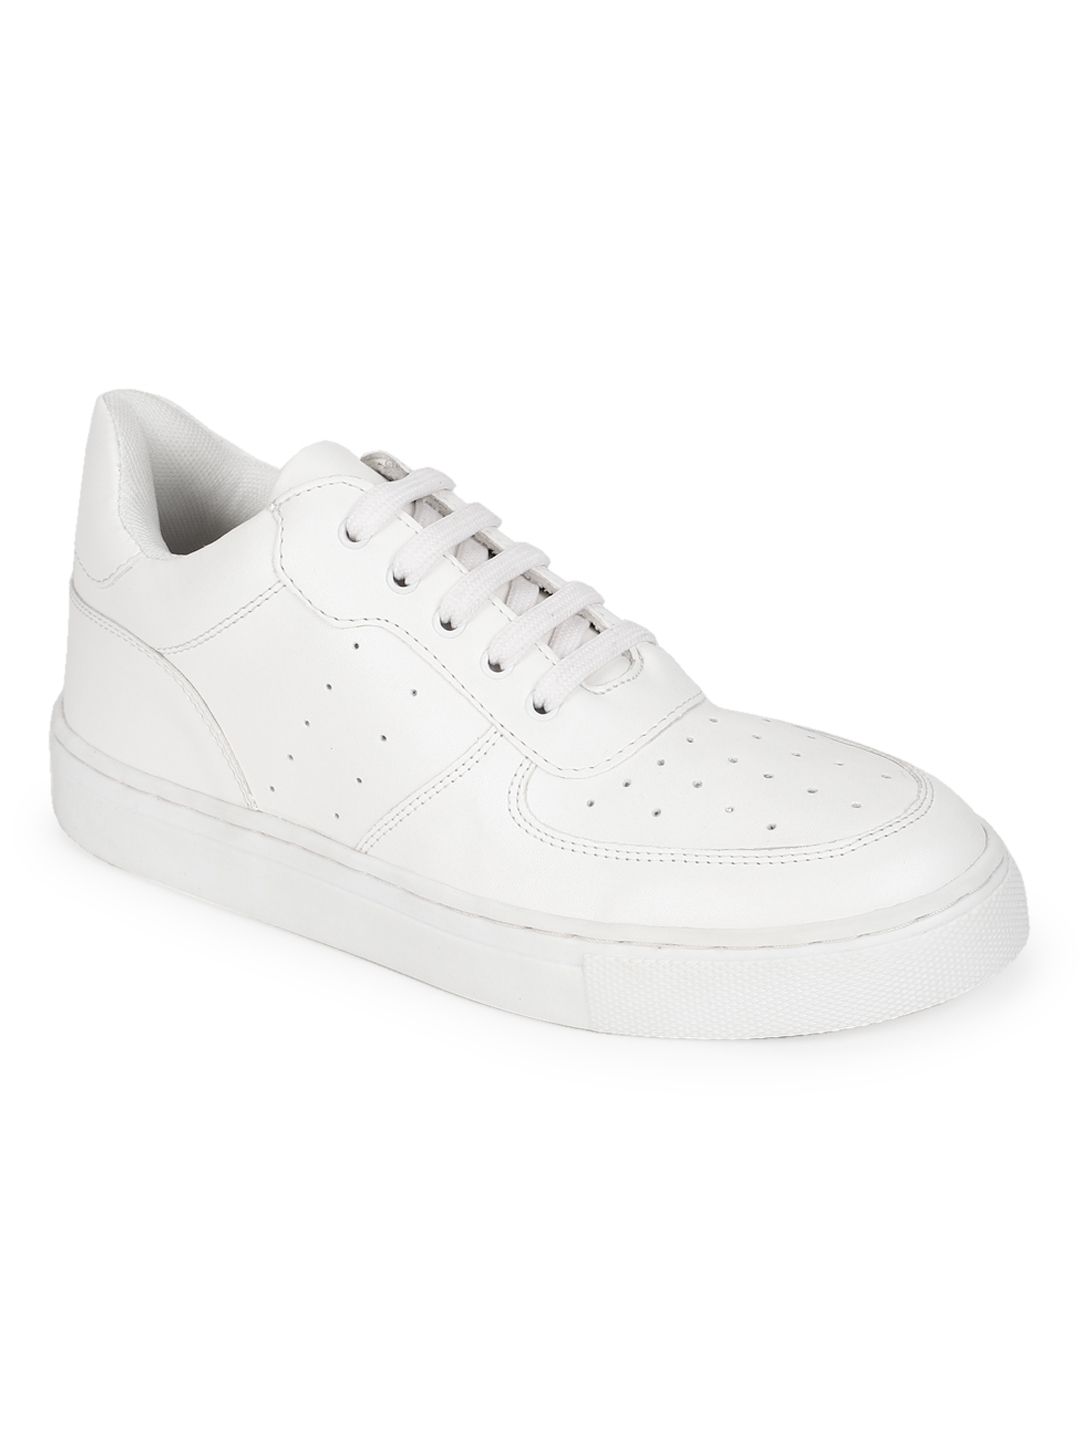 Truffle Collection | White PU Perforated Lace Up Sneakers